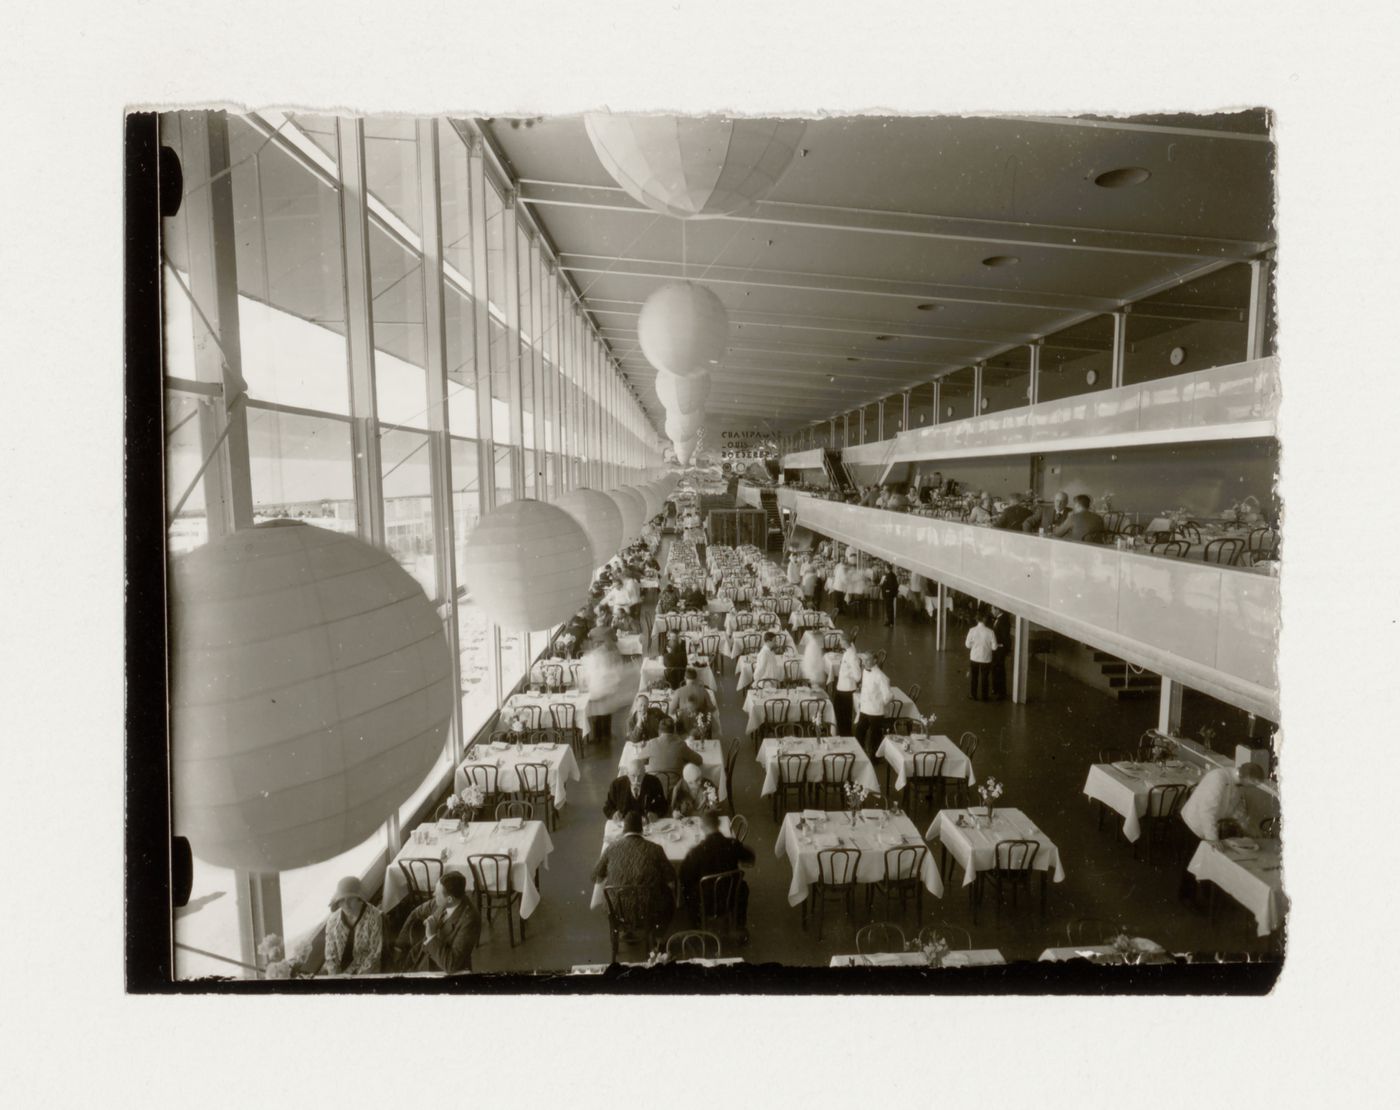 Interior view of Paradise Restaurant at the Stockholm Exhibition of 1930 showing the first floor and galleries, Stockholm